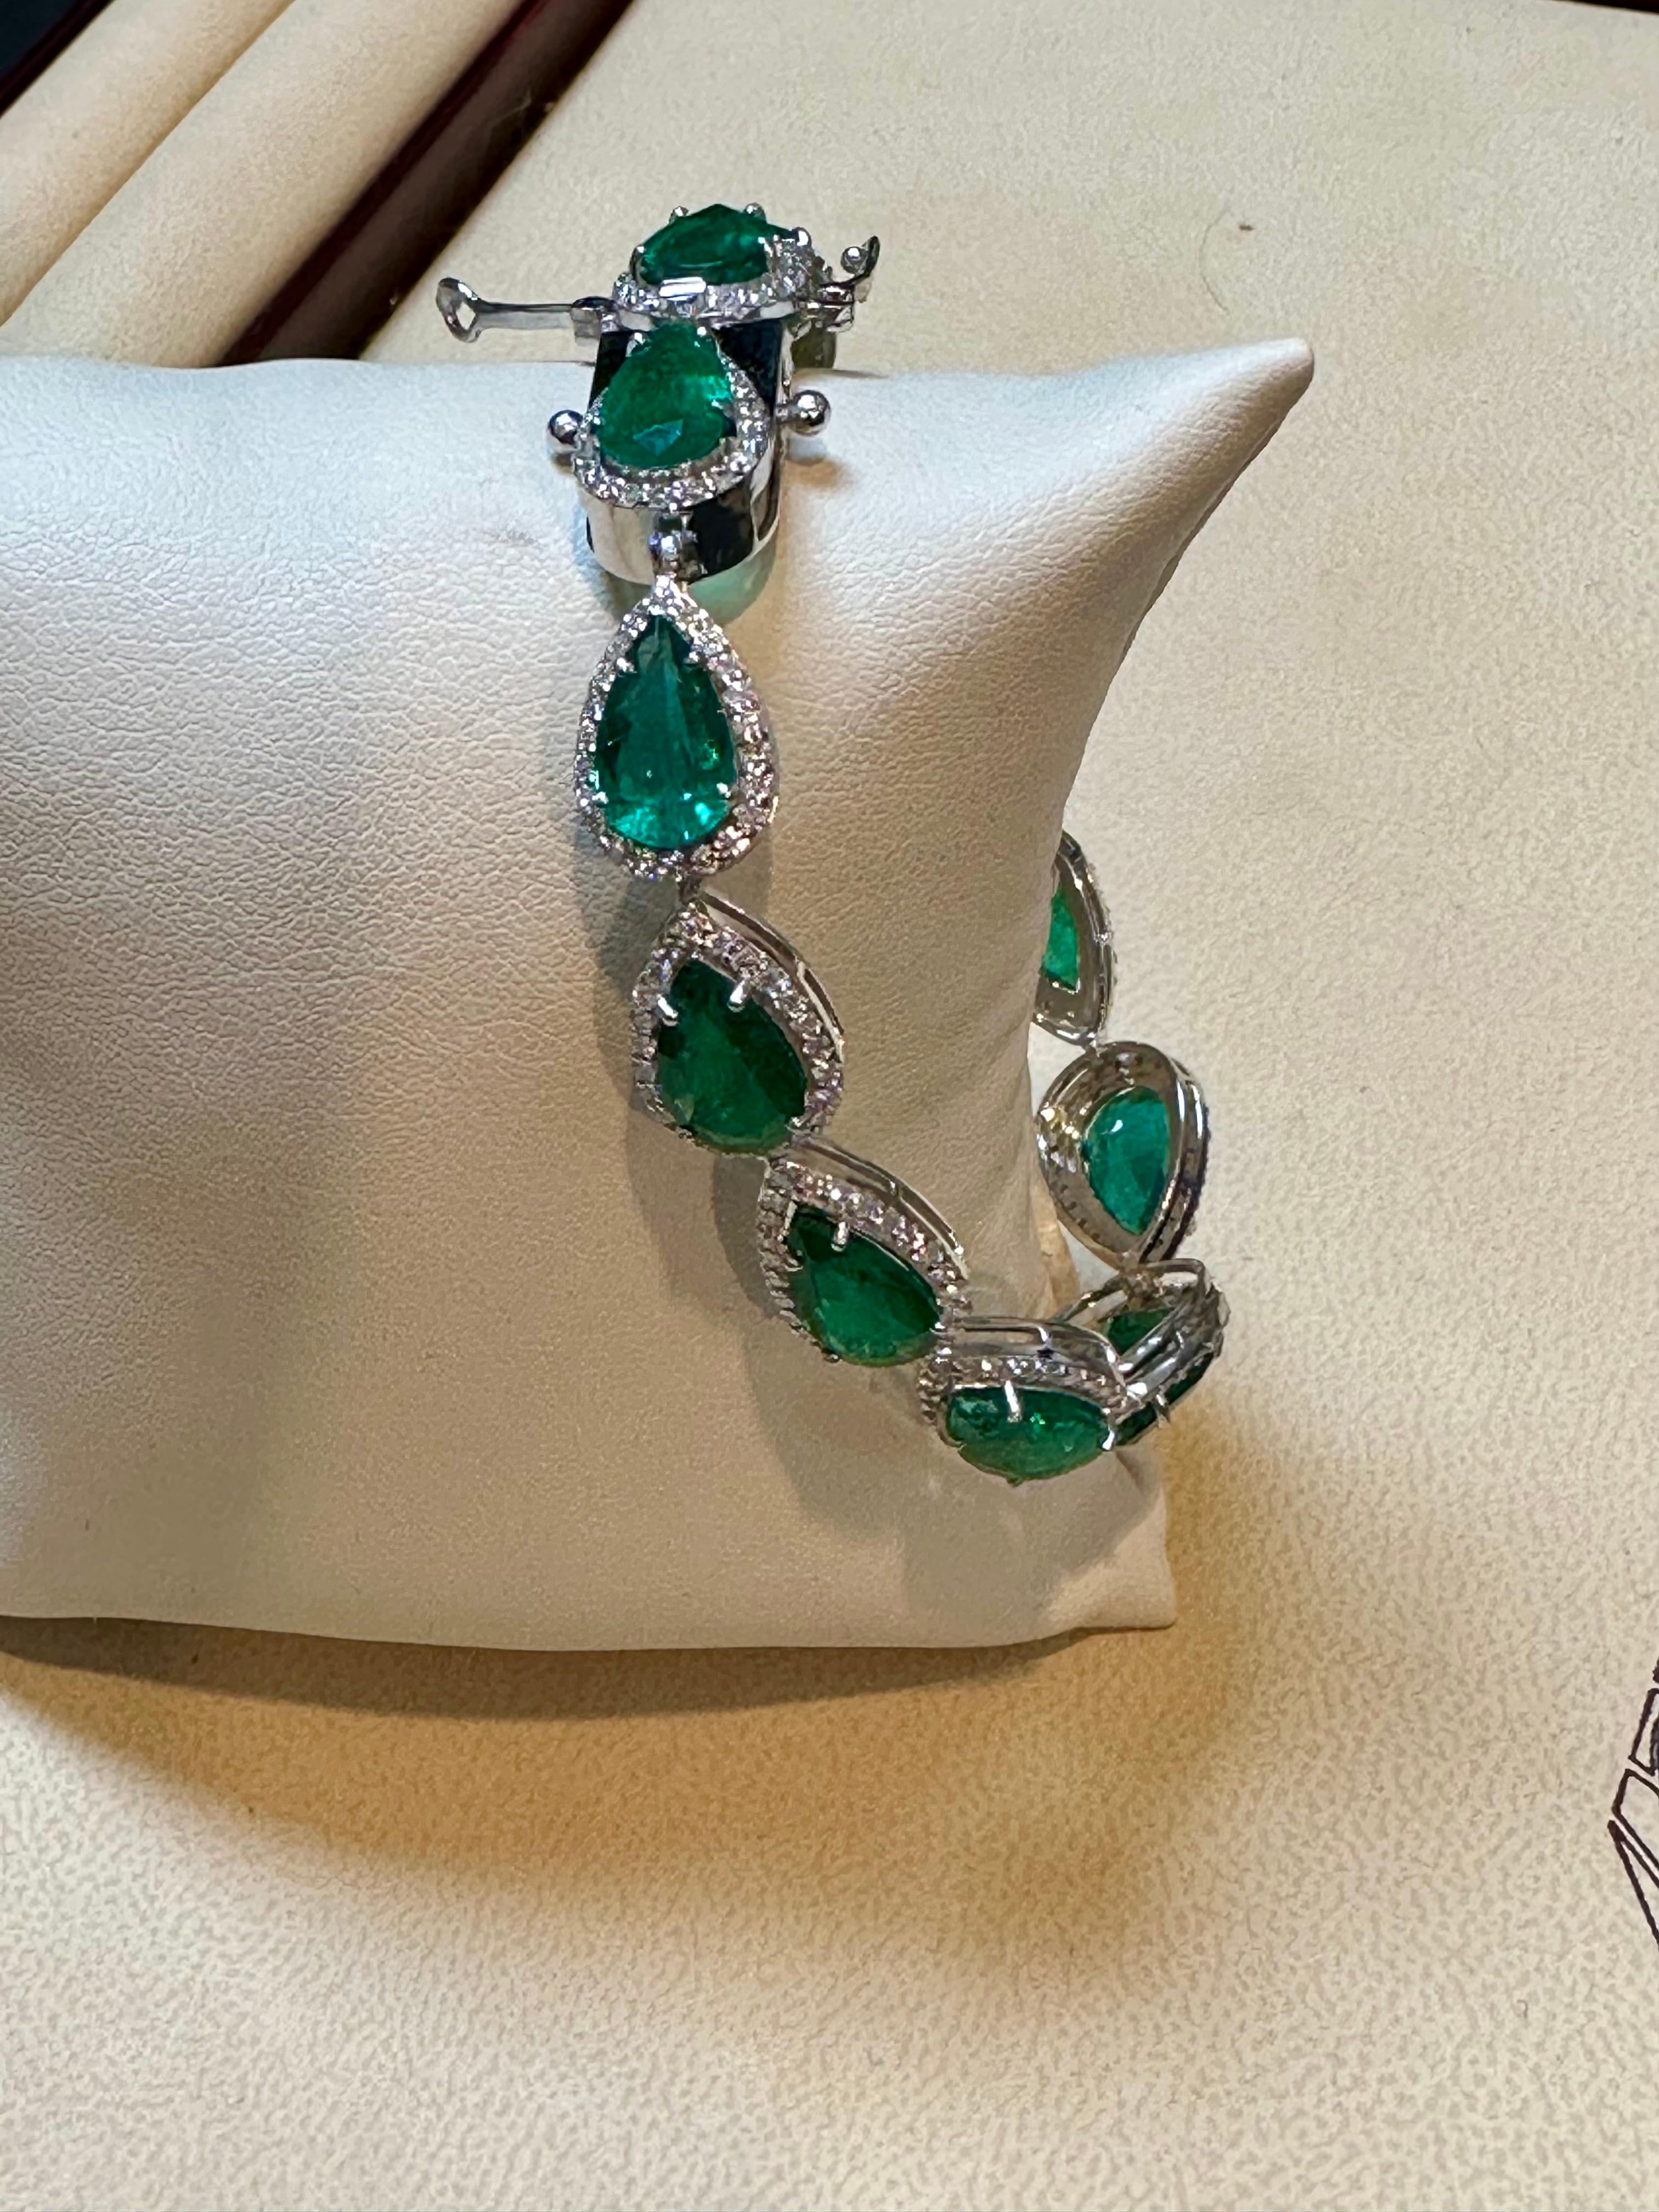 28 Carat Natural Zambian Emerald & Diamond Tennis Bracelet 14 Karat White Gold In New Condition For Sale In New York, NY